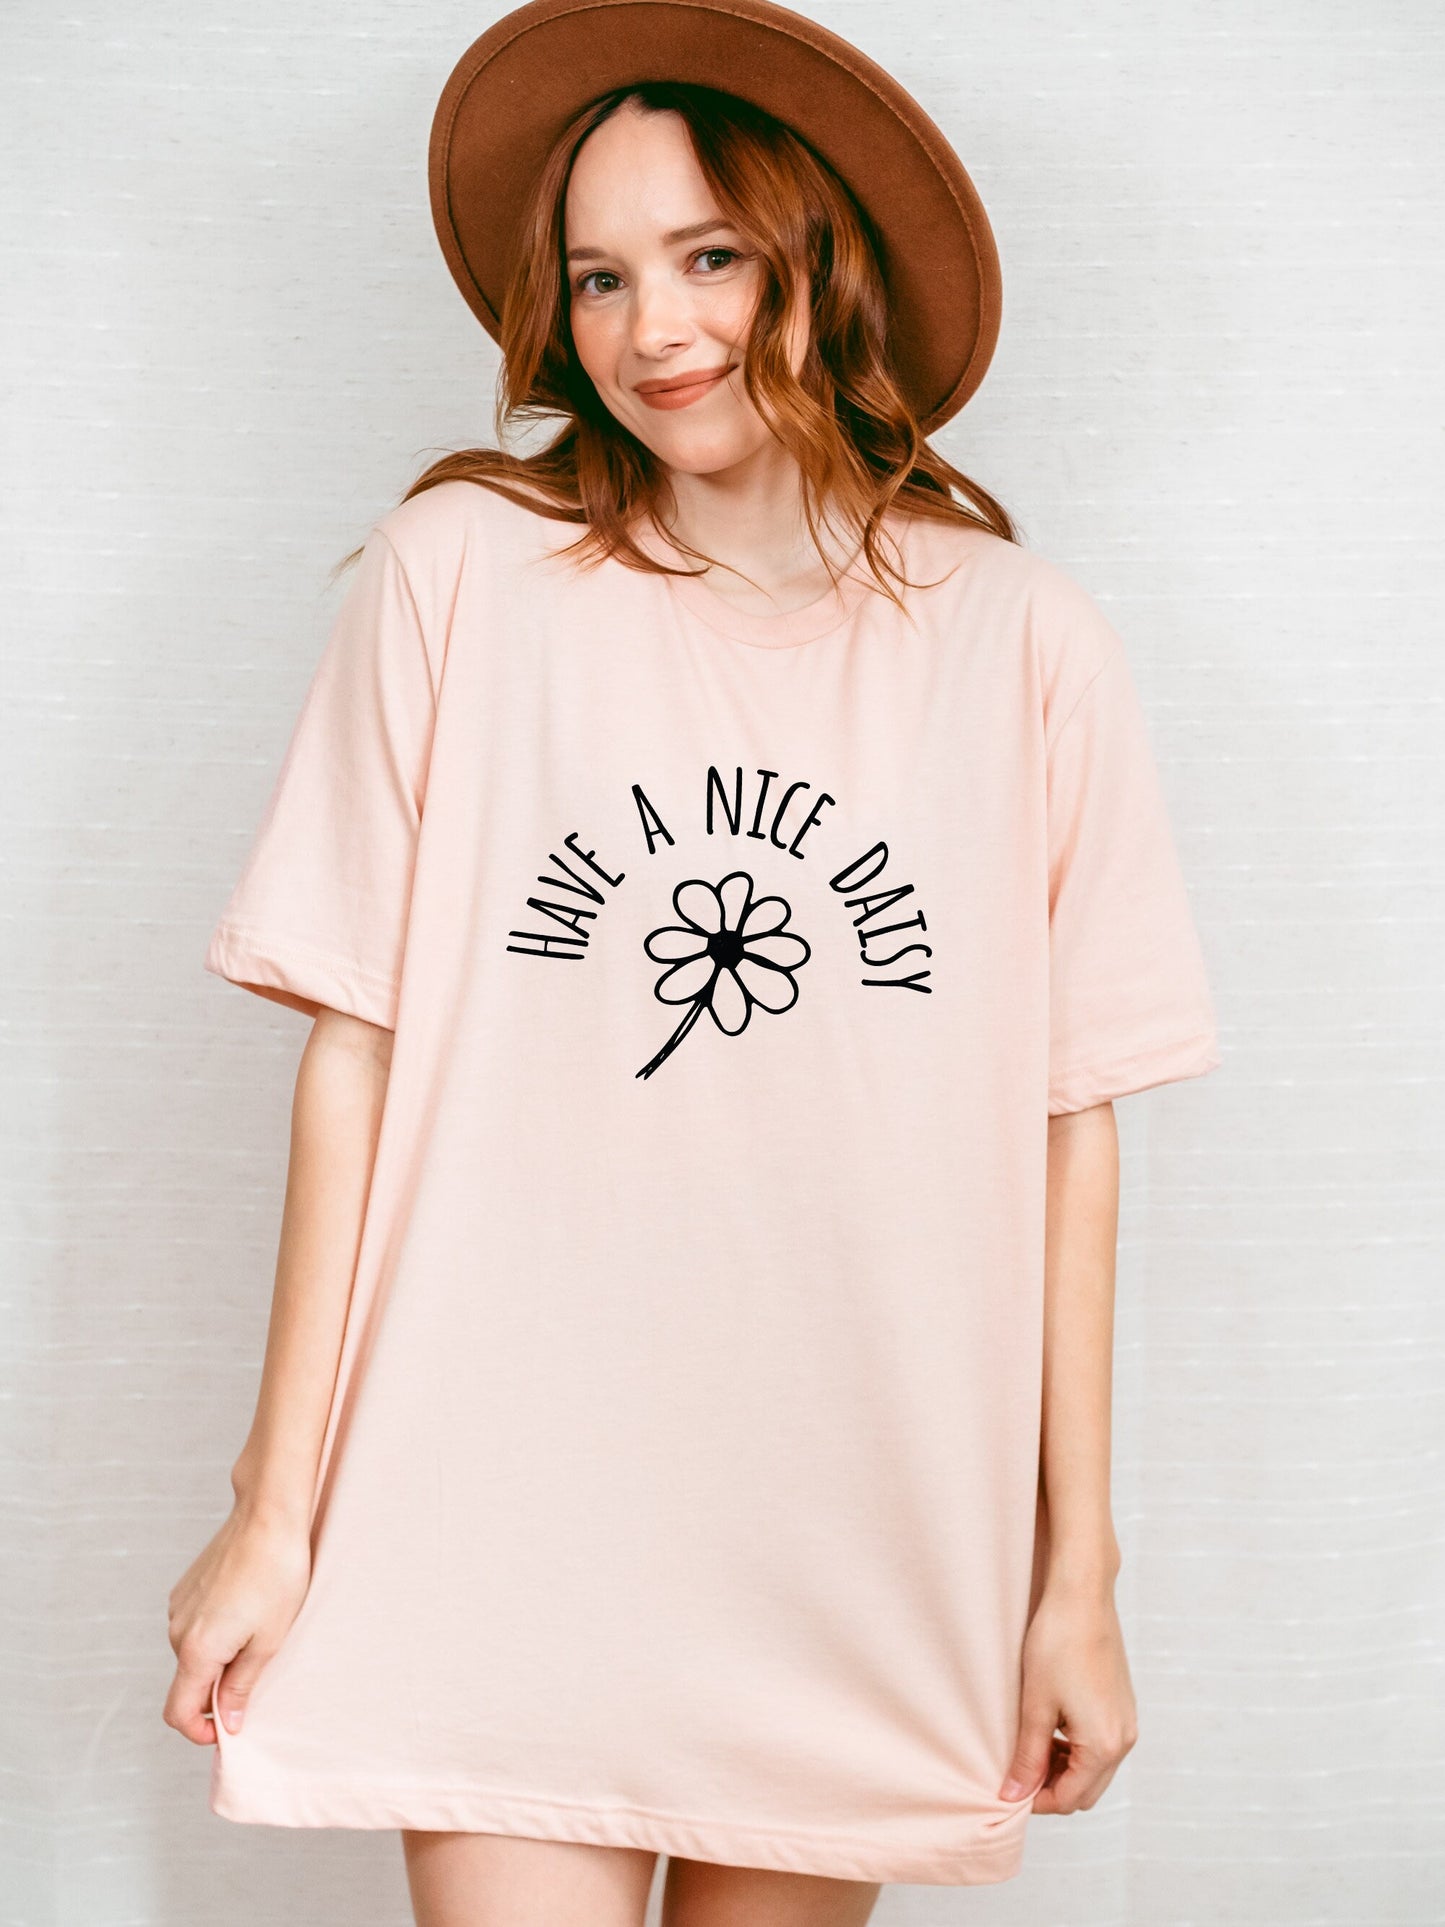 Have a Nice Daisy Large White Flower Summer and Spring! Ultra Soft Graphic Tee Unisex Soft Tee T-shirt for Women or Men